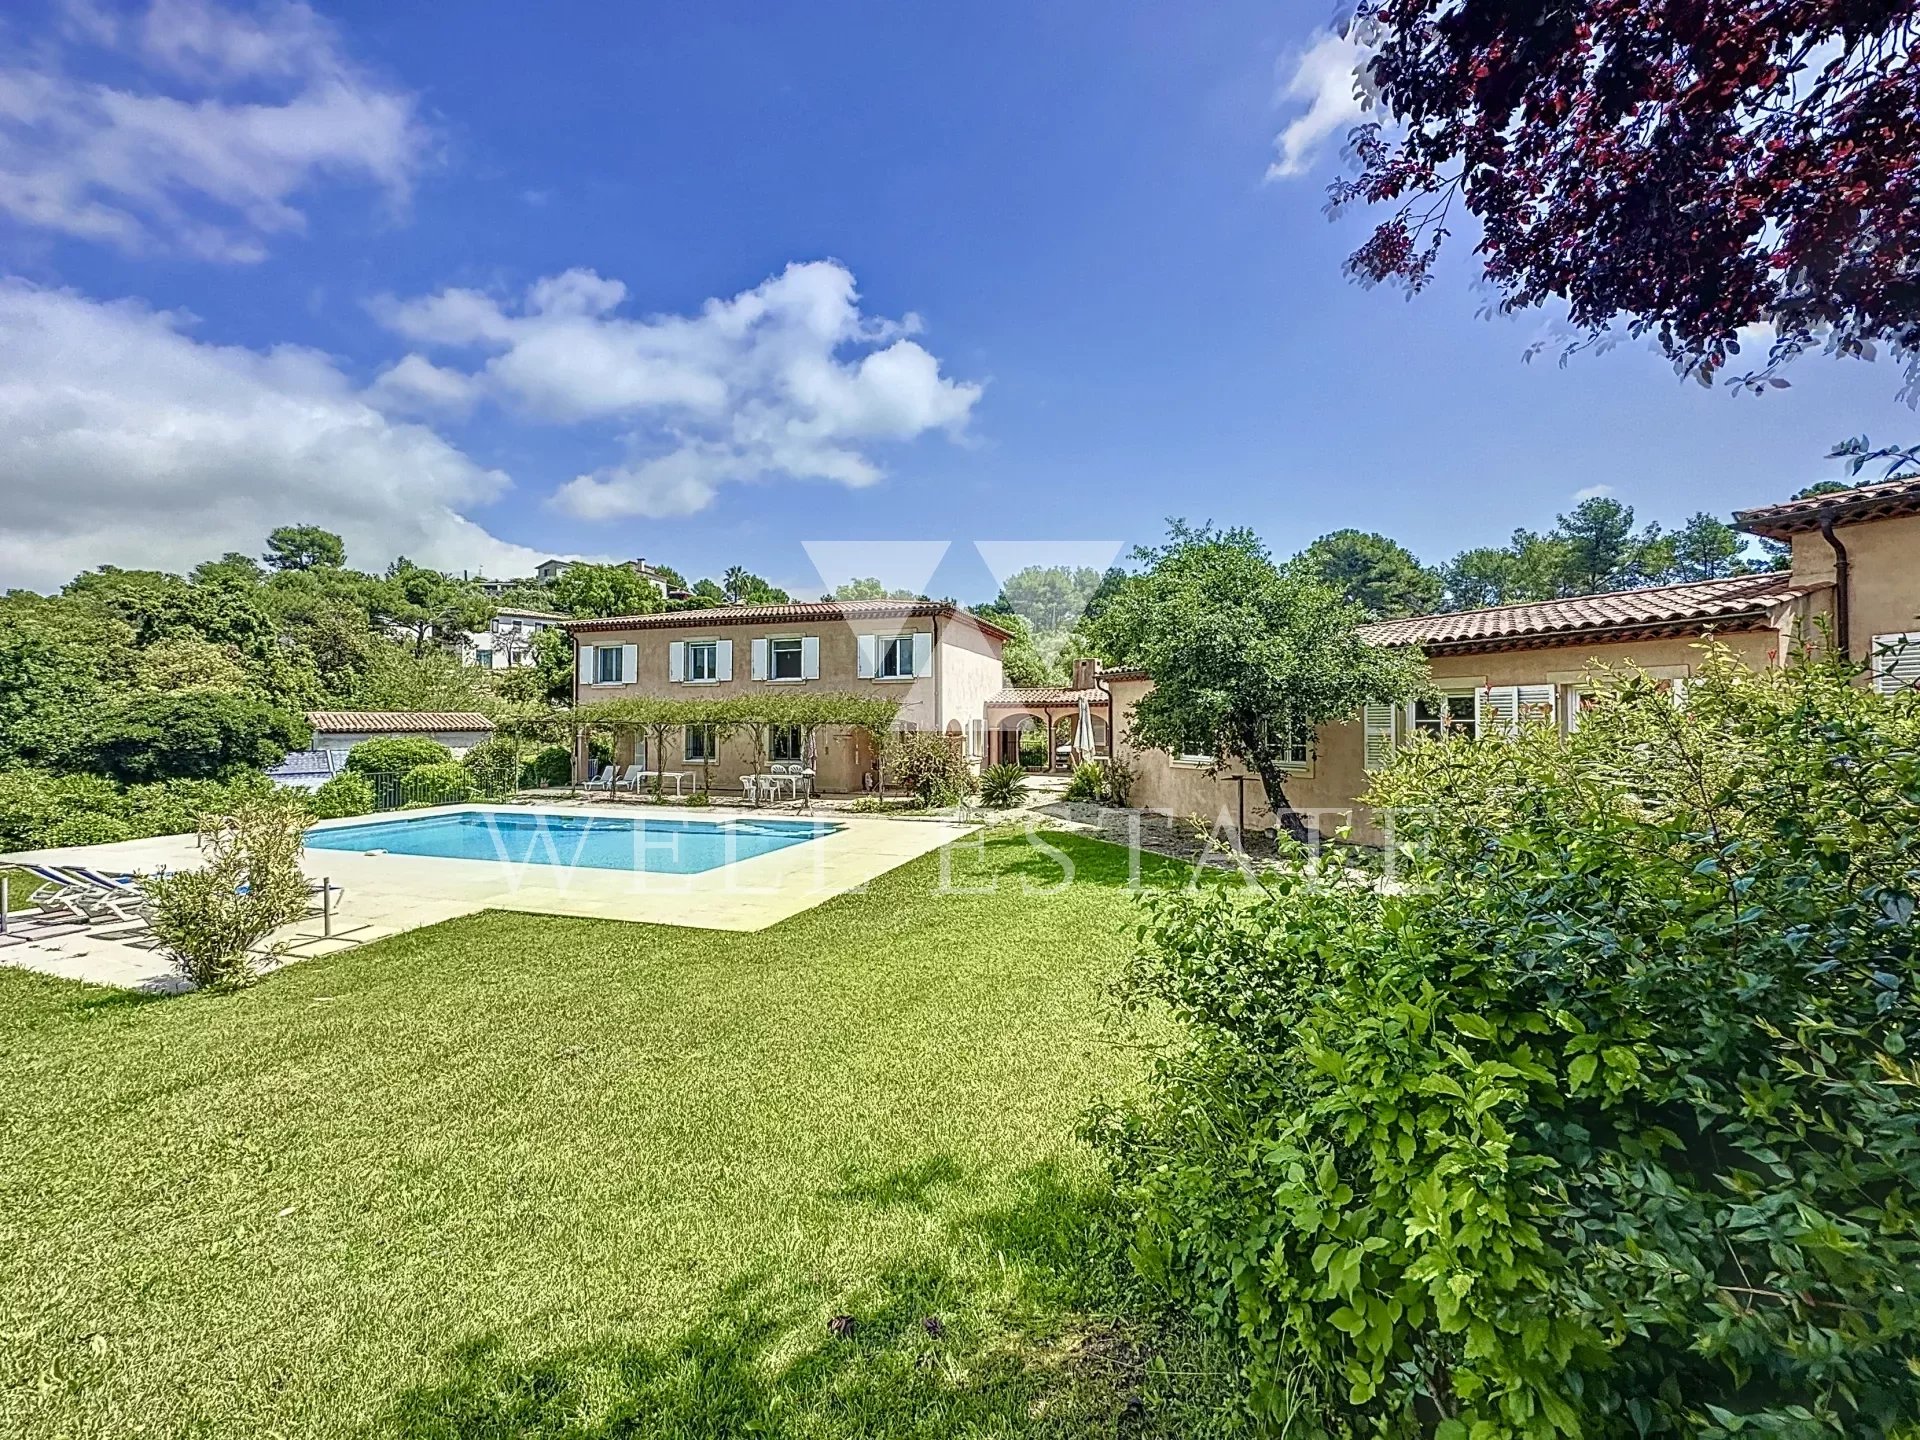 ROQUEFORT-LES-PINS - 450M² HOUSE WITH POOL